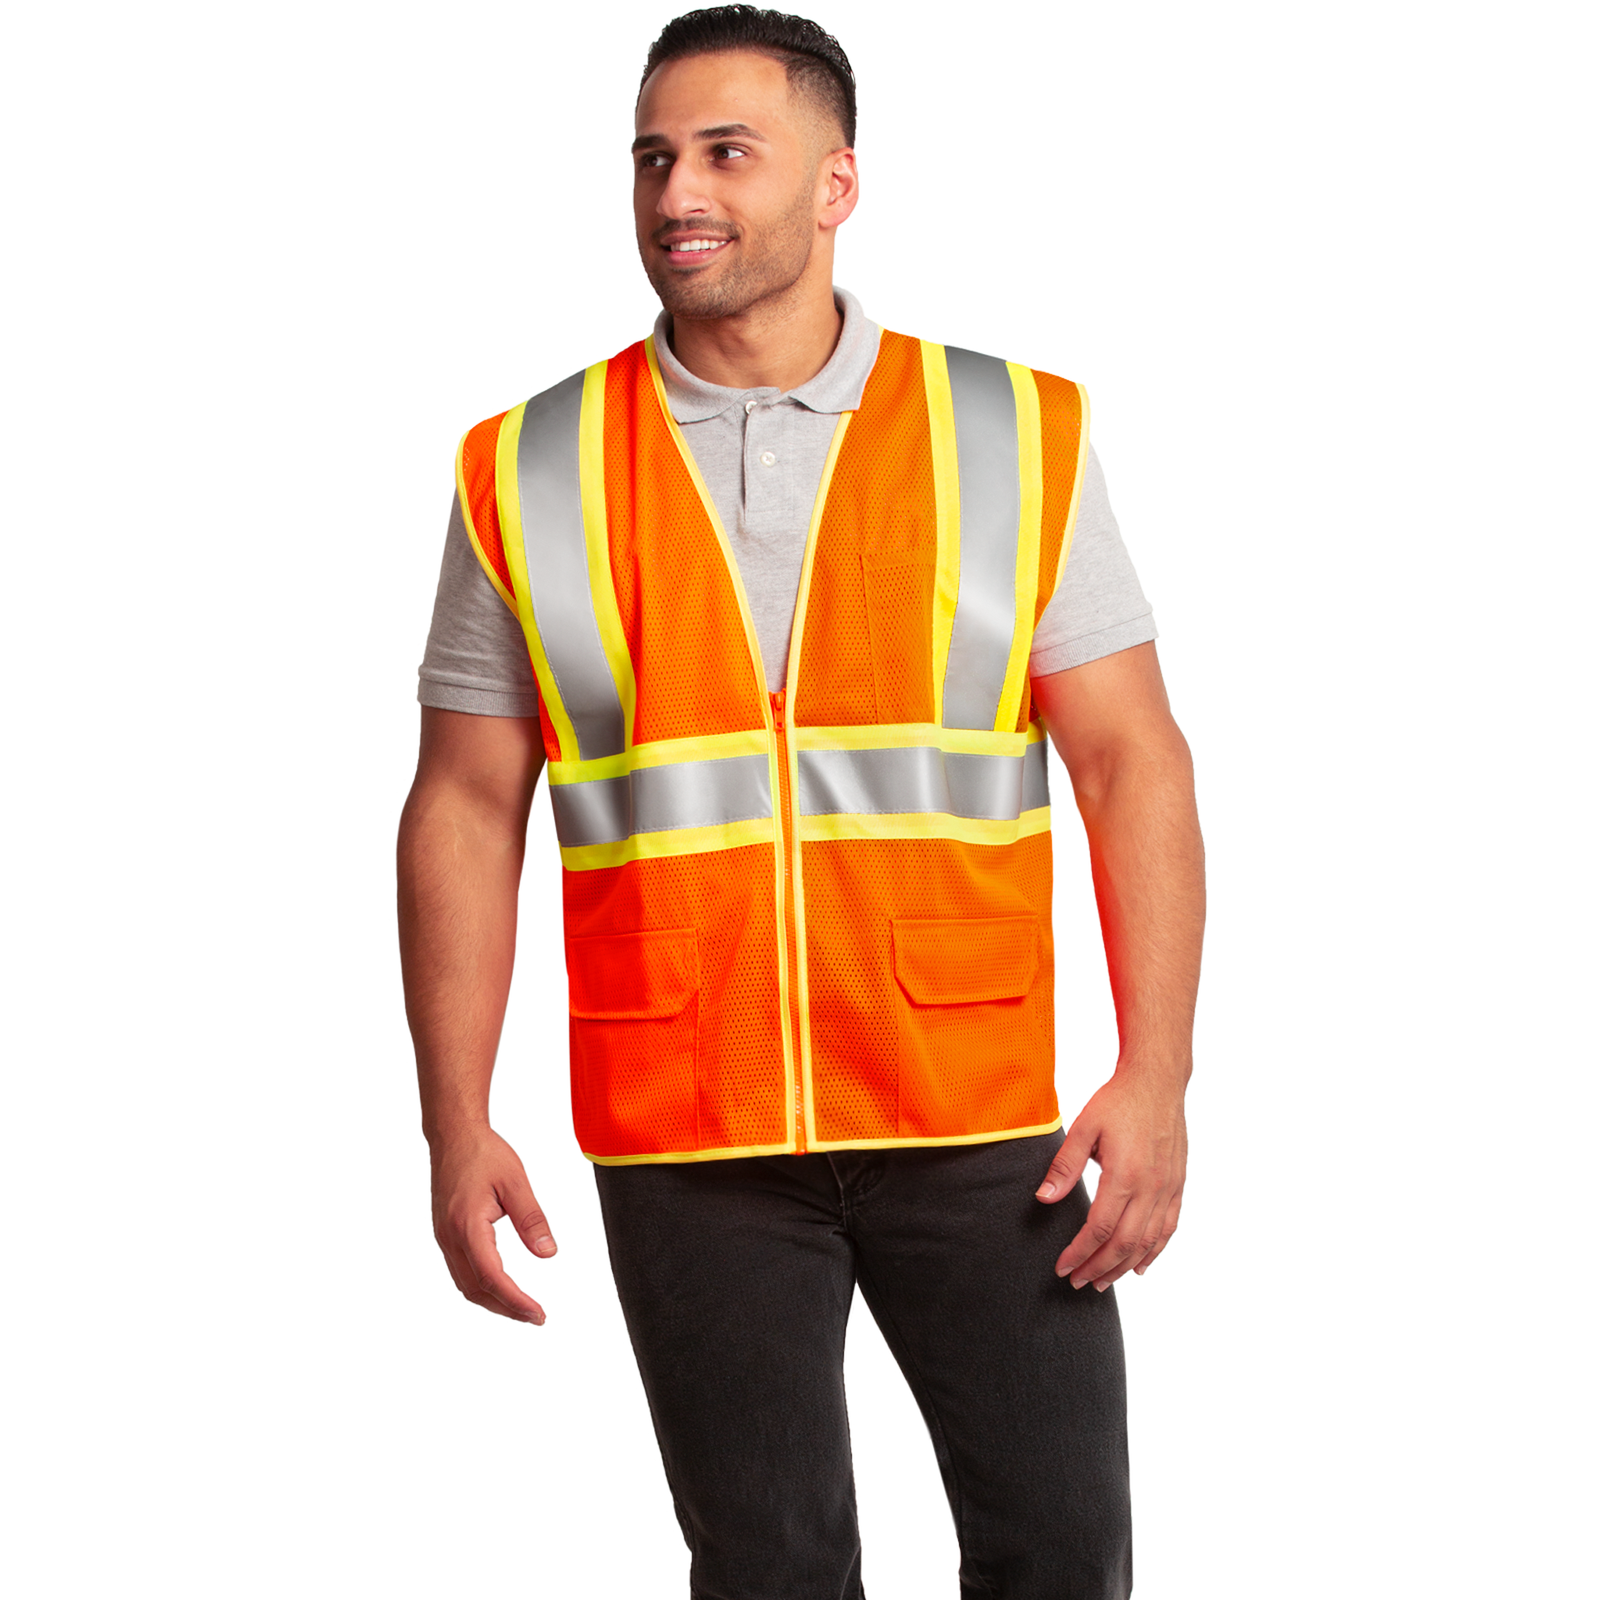 Image of a man wearing black pants and a JORESTECH vi-vis two tone mesh safety vest with 2 inches reflective strips